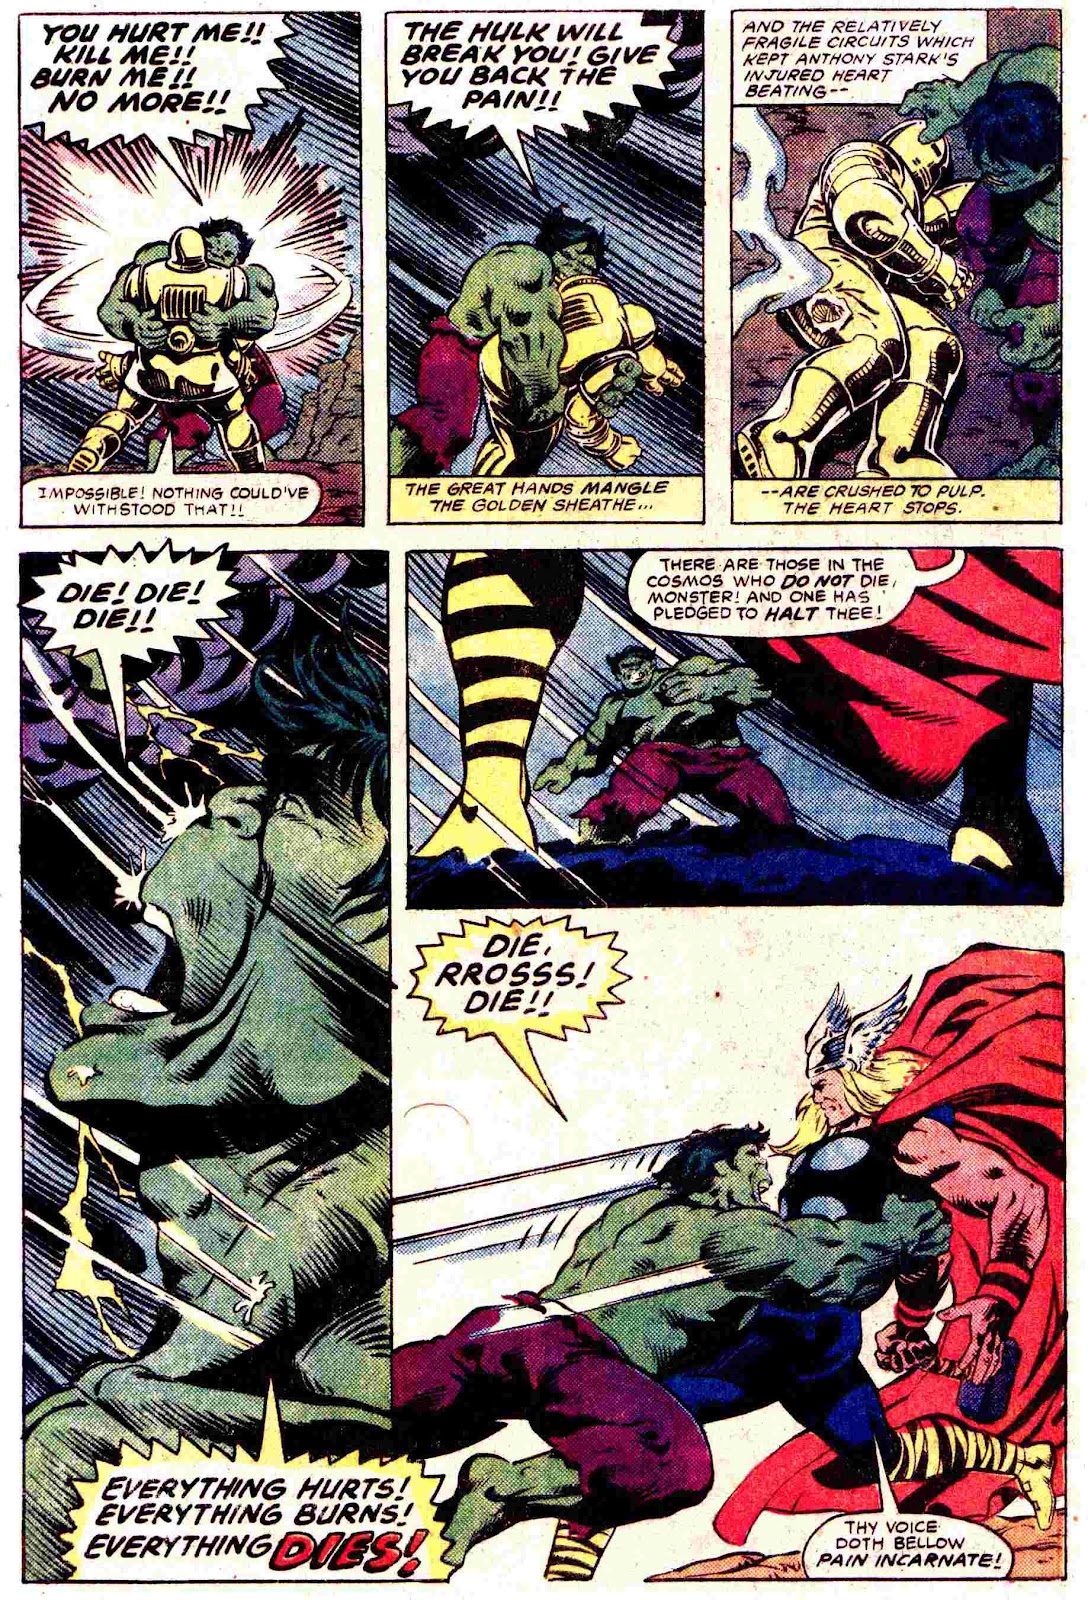 What If? (1977) issue 45 - The Hulk went Berserk - Page 39